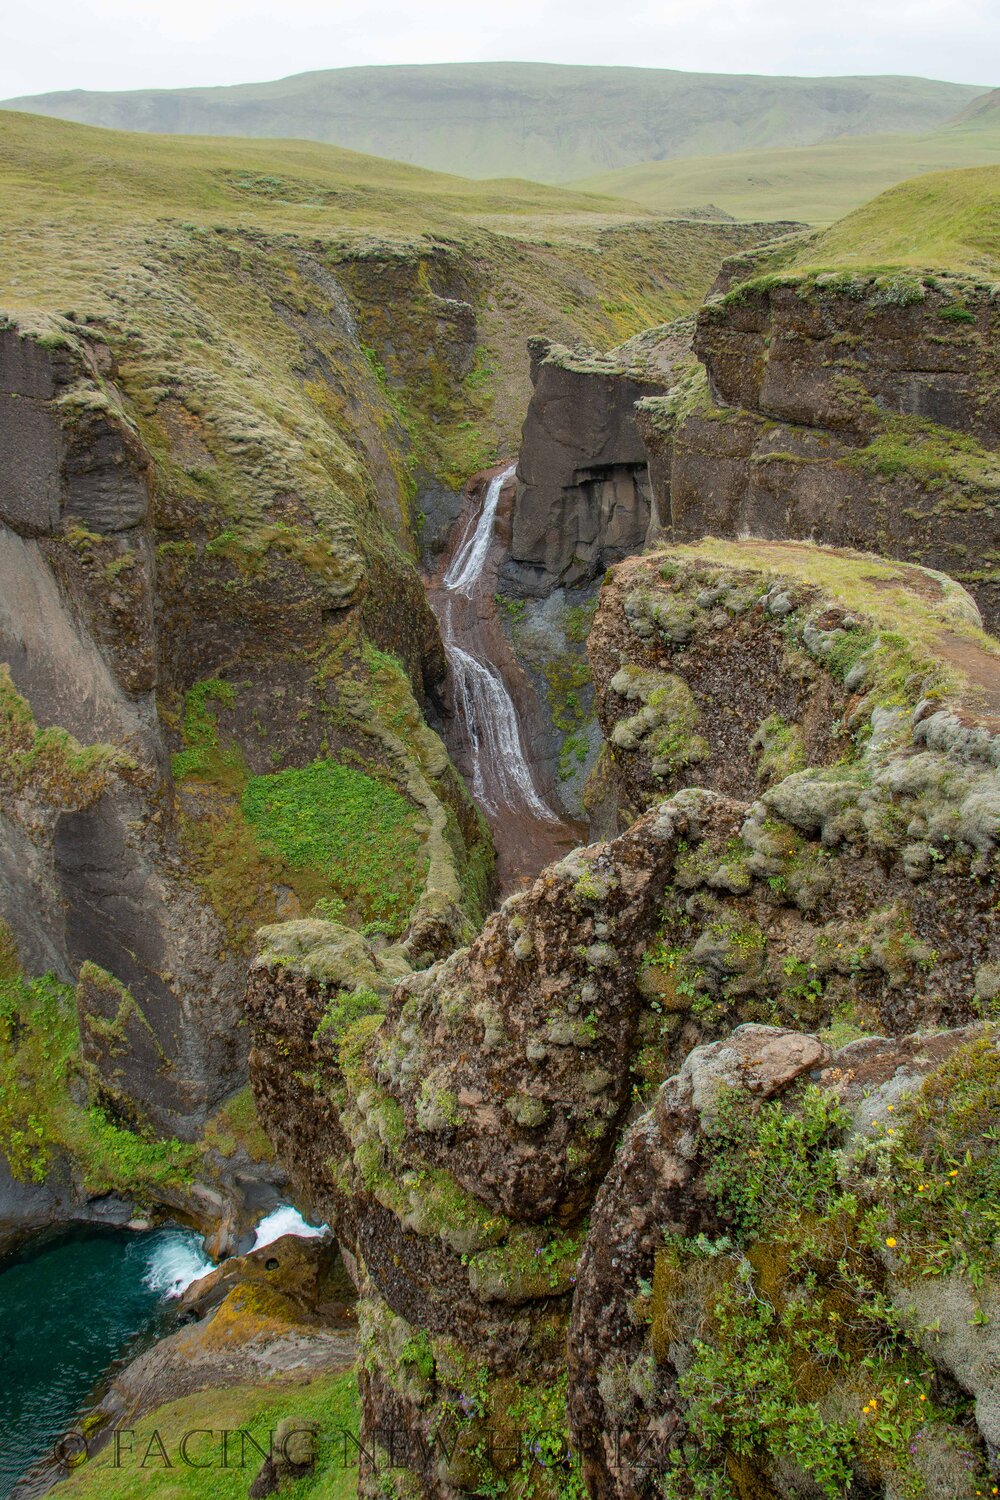  At the end of the canyon, a waterfall feeds the river 